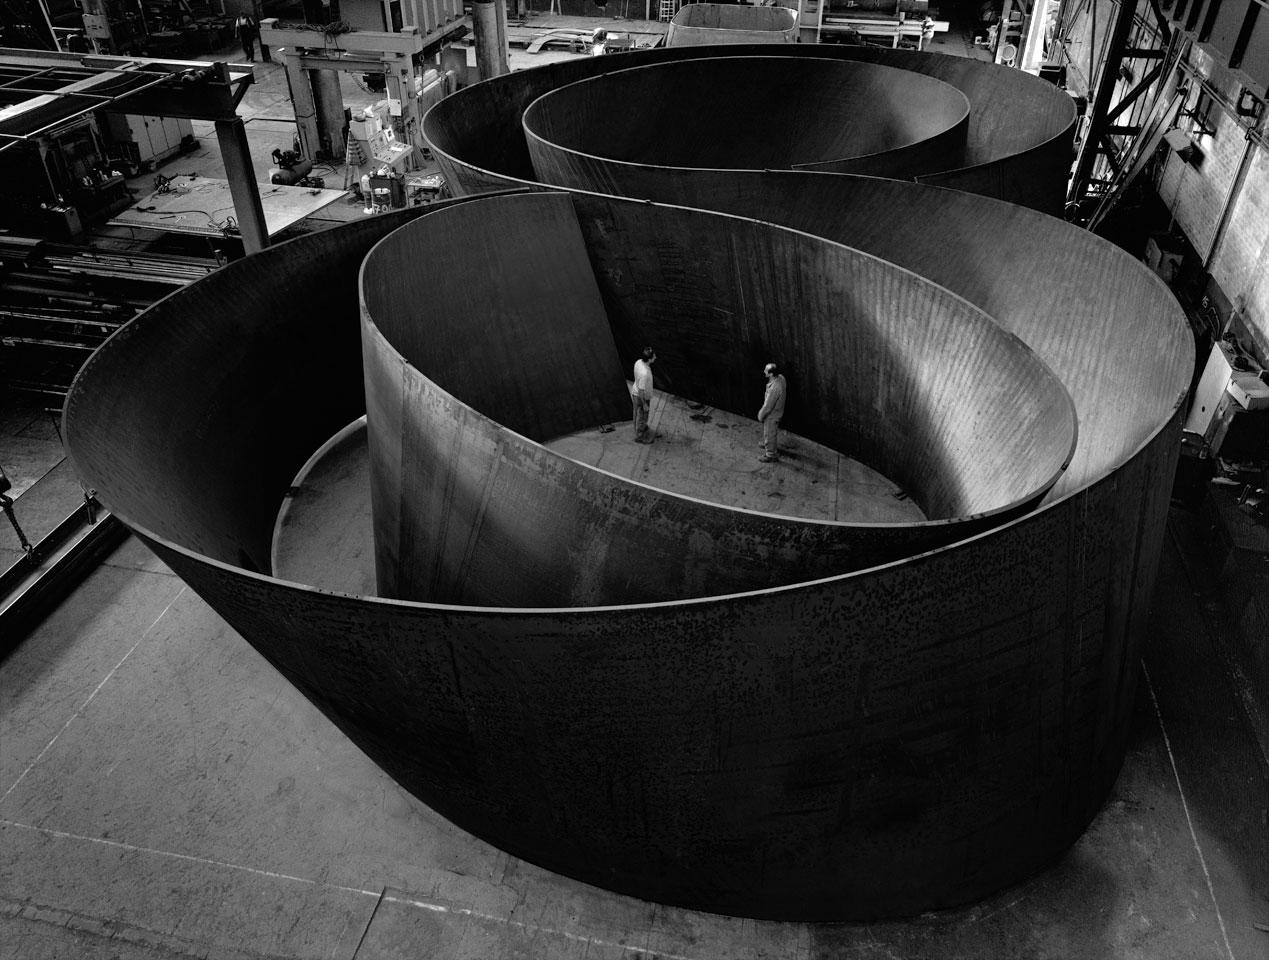 Happy 75th birthday, Richard Serra! "Space, as my work evolved, really became my subject." 